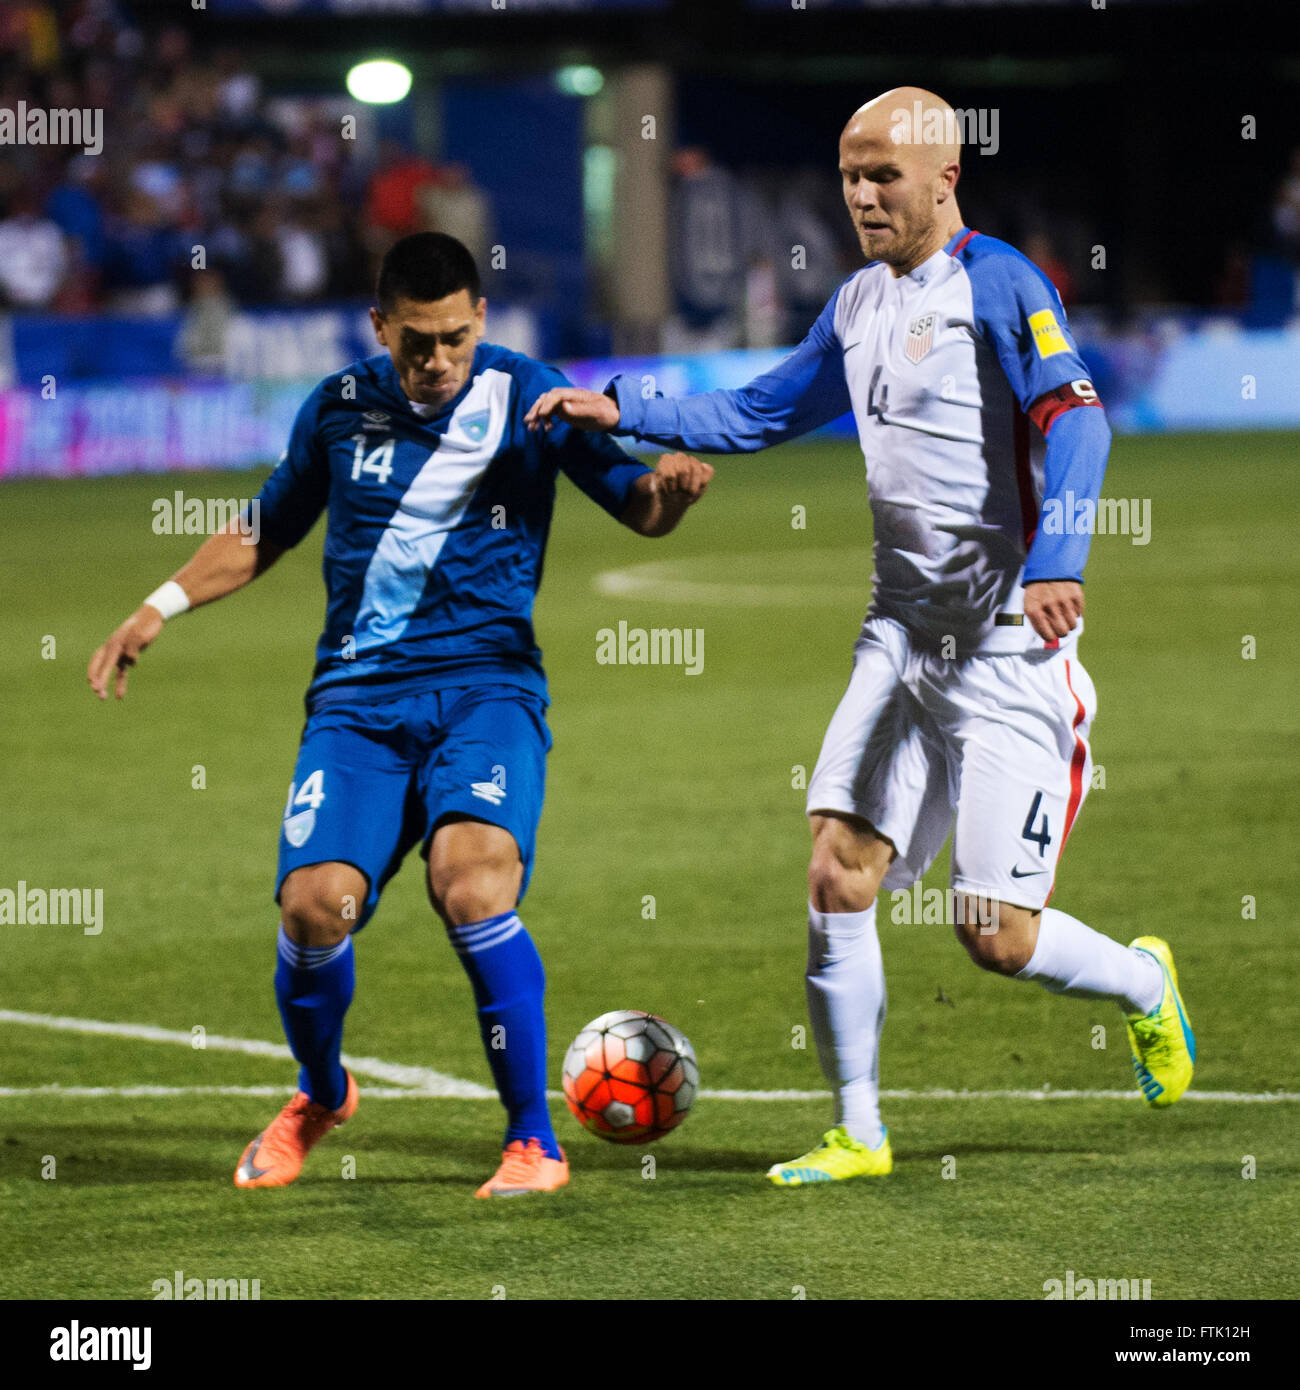 Ohio, USA. 29th March, 2016. Guatemala midfielder Rafael Morales defends against USA midfielder Michael Bradley in a World Cup Qualifying Match Columbus, Ohio, USA Credit:  Brent Clark/Alamy Live News Stock Photo